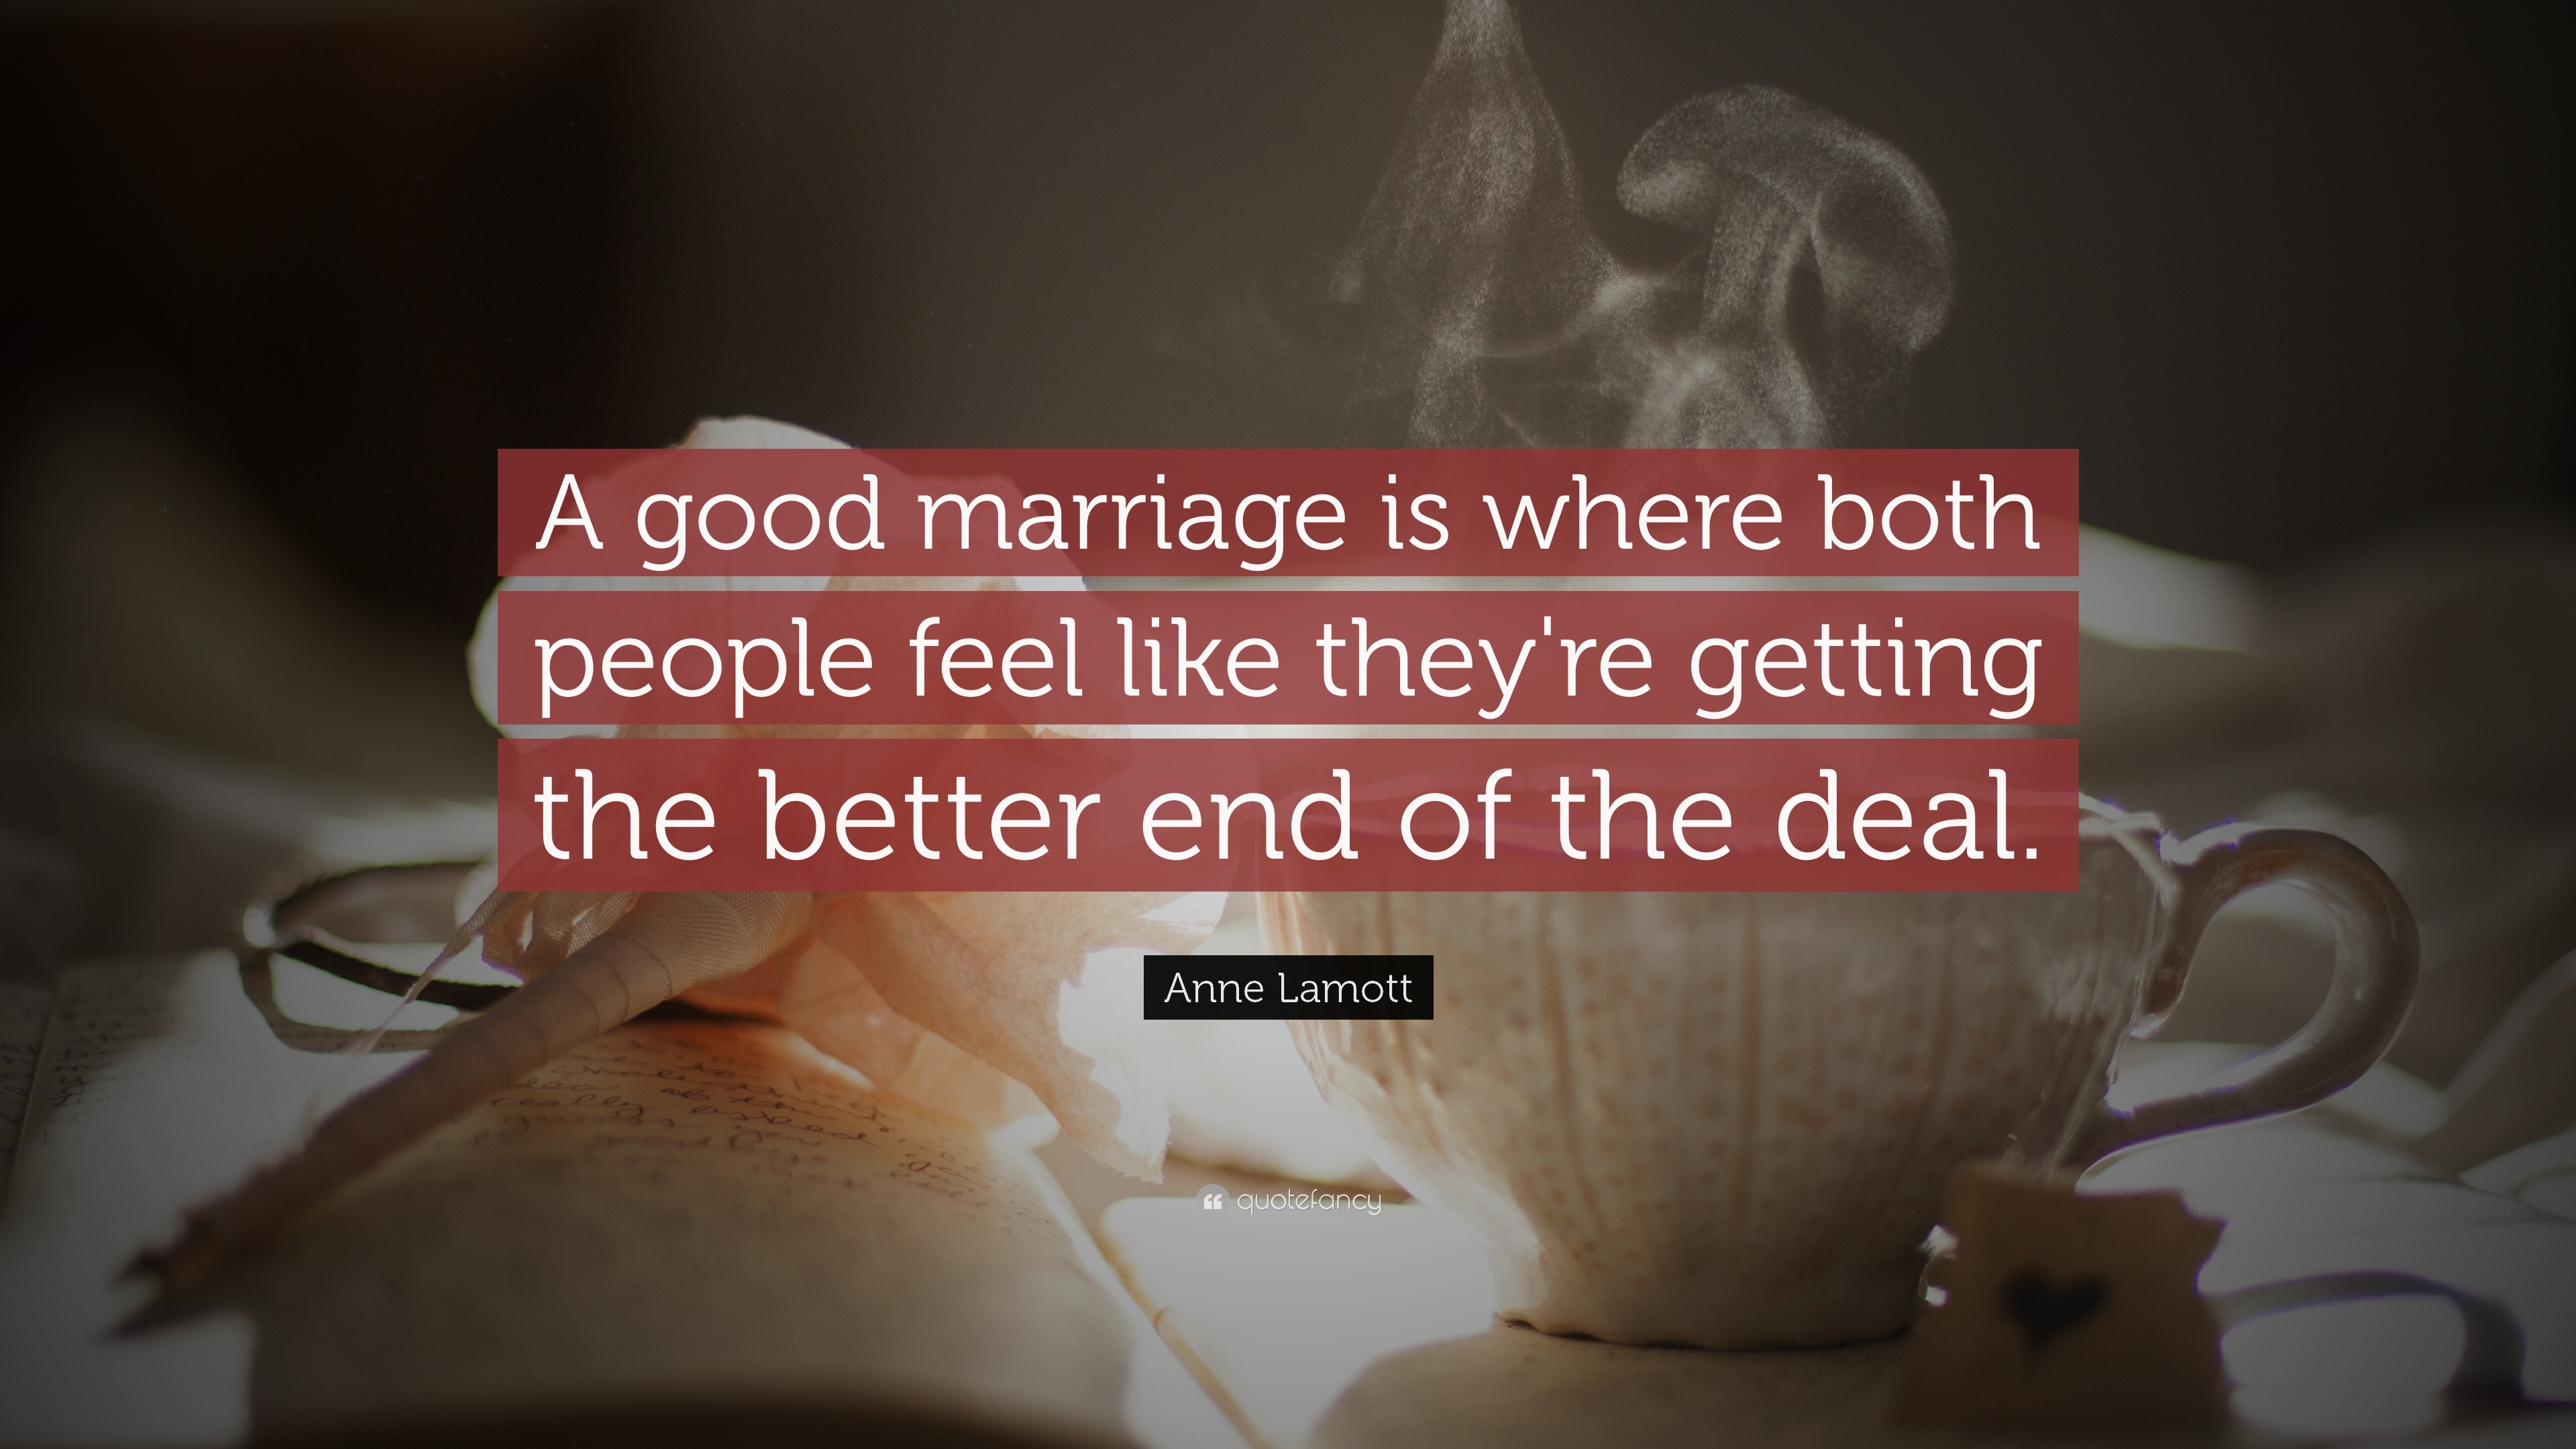 Marriage Quotes “A good marriage is where both people feel like they re